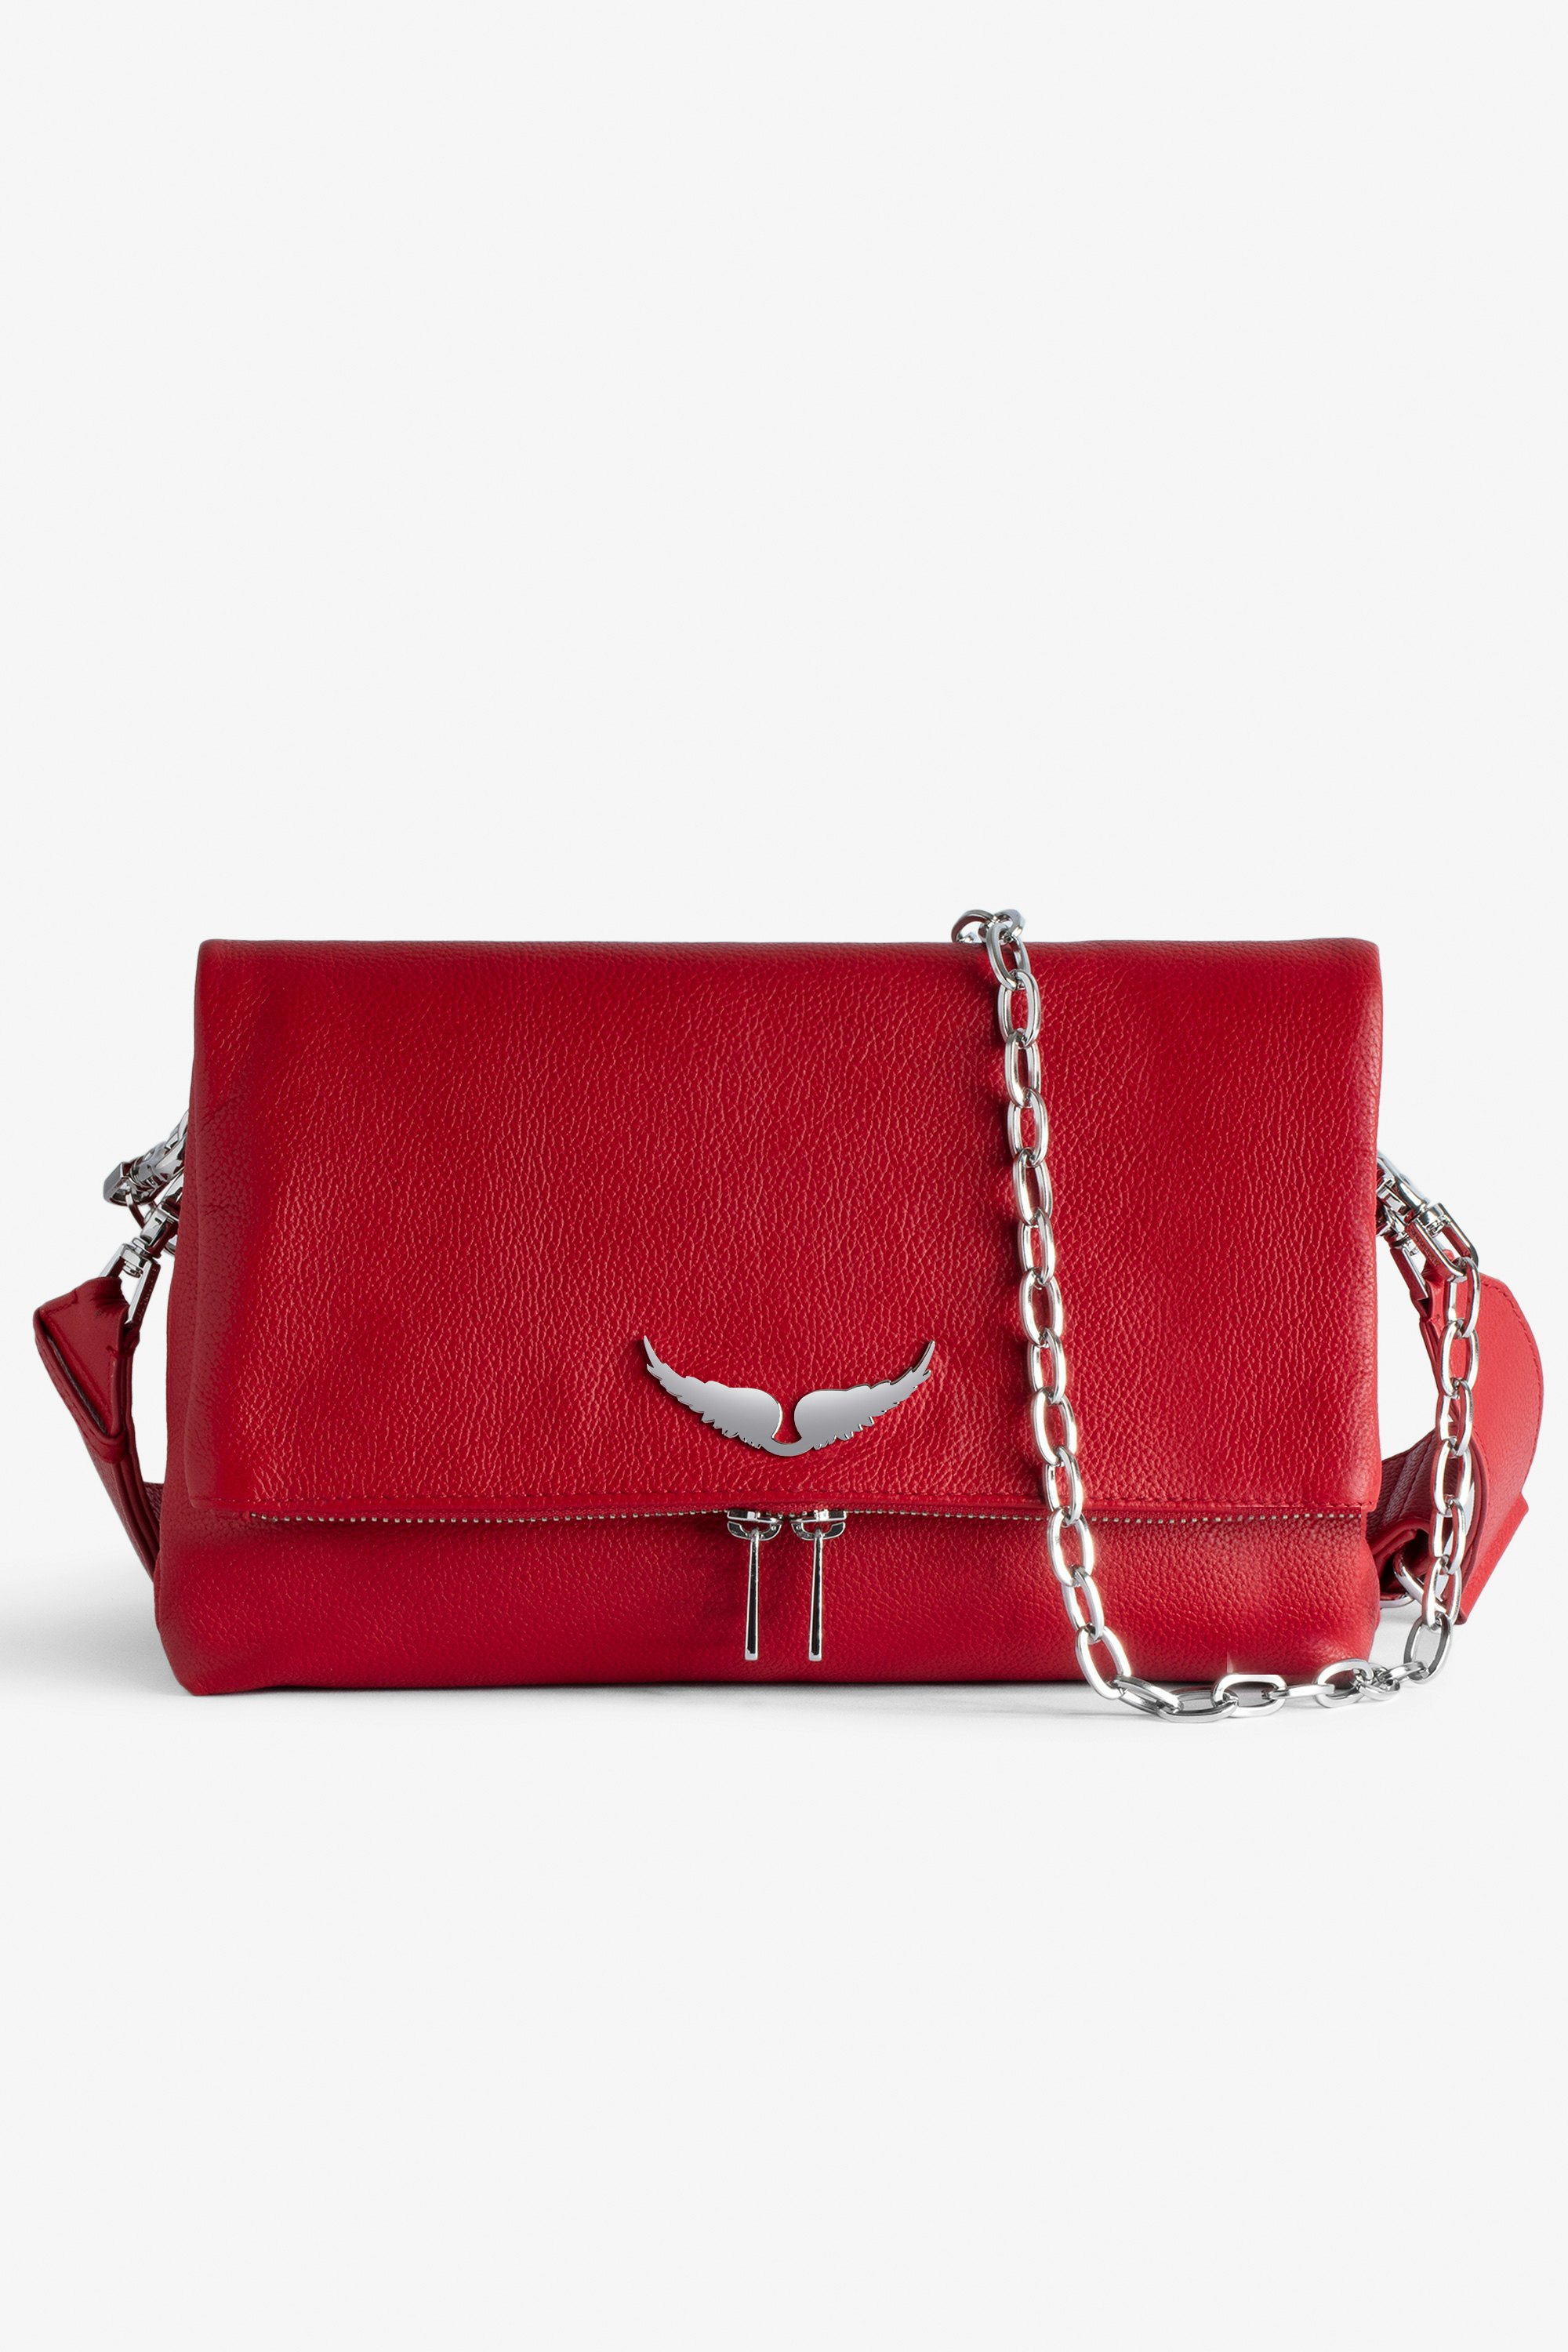 Rocky Bag Women’s red grained leather bag with shoulder strap and wings charm